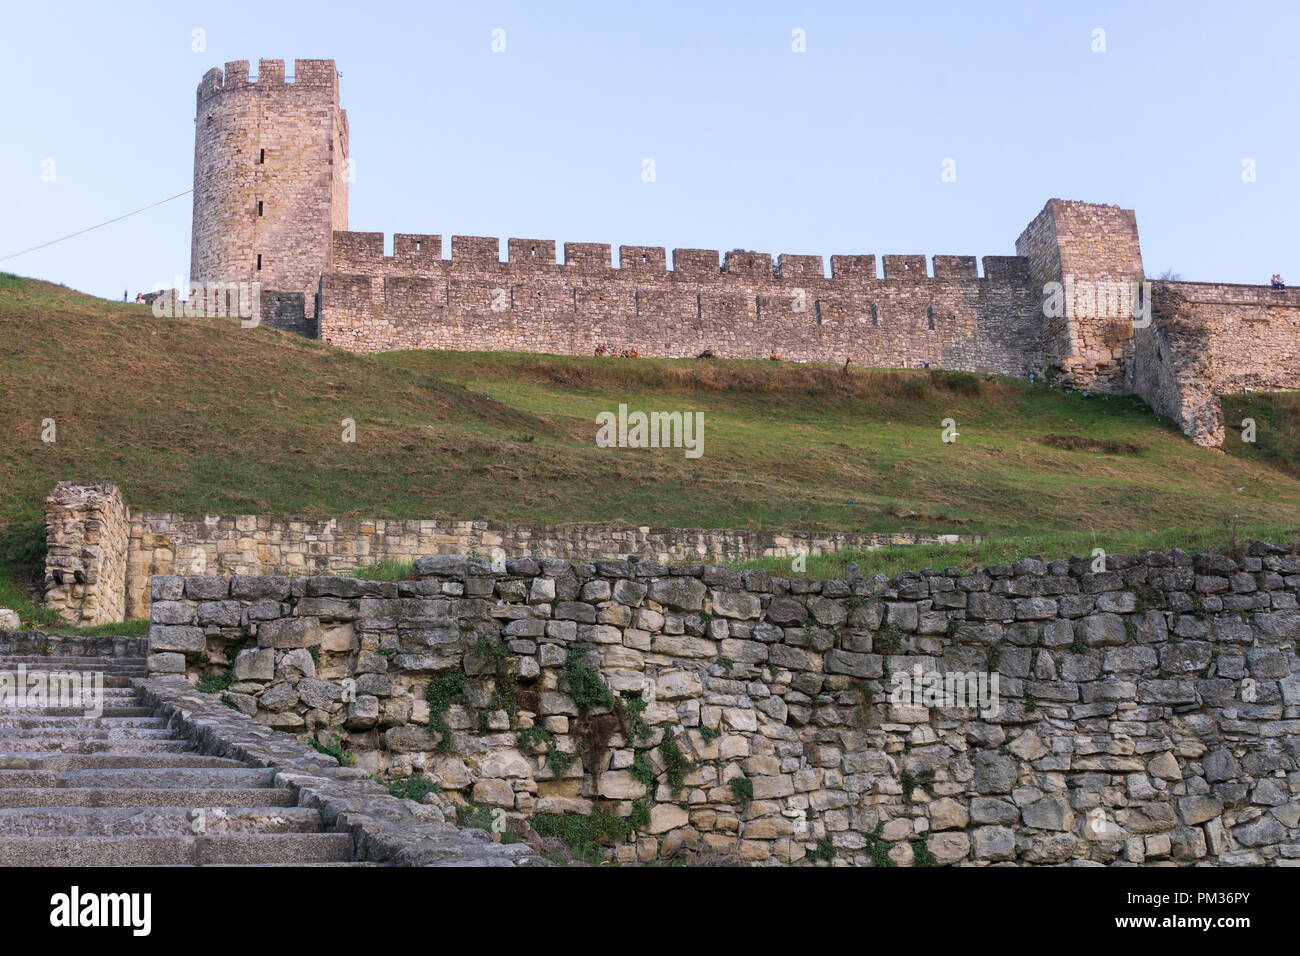 Dizdar tower of the Belgrade fortress Kalemegdan seen from the Lower Town. Serbia. Stock Photo